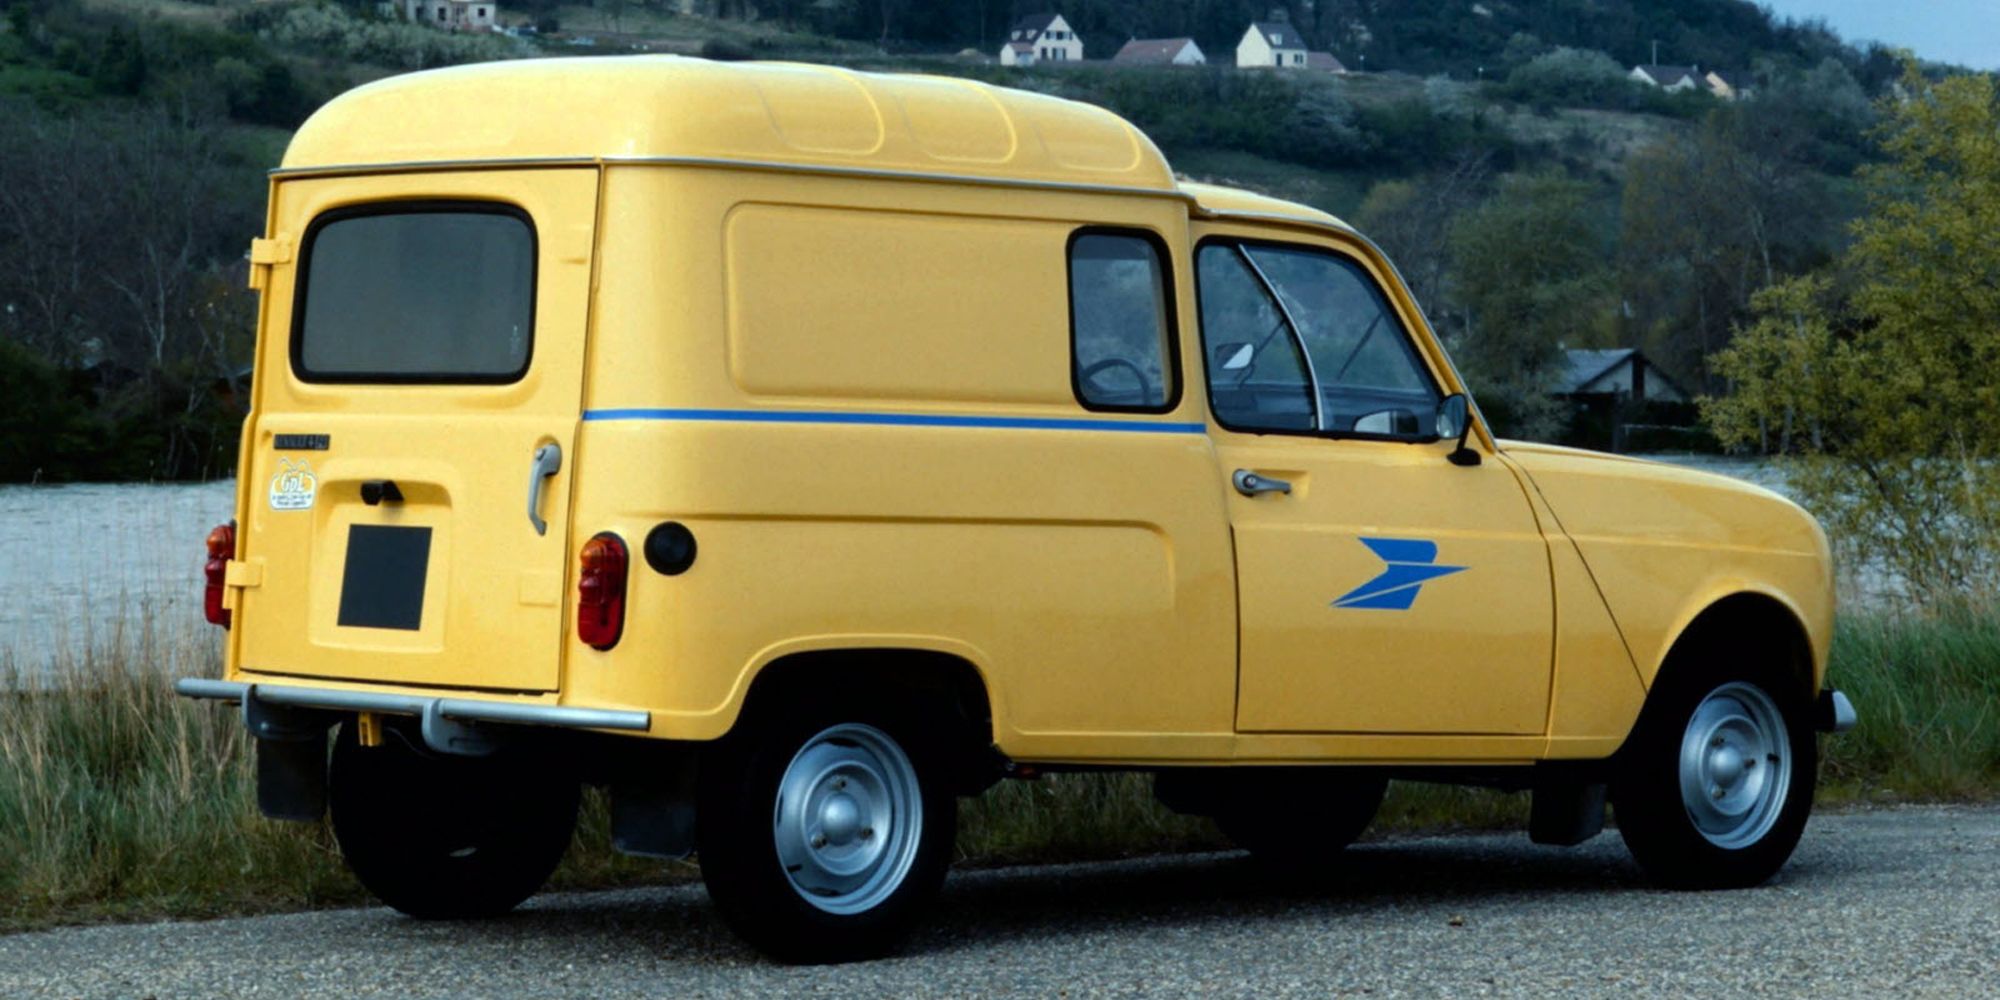 A Renault 4L panel van, used by the postal service